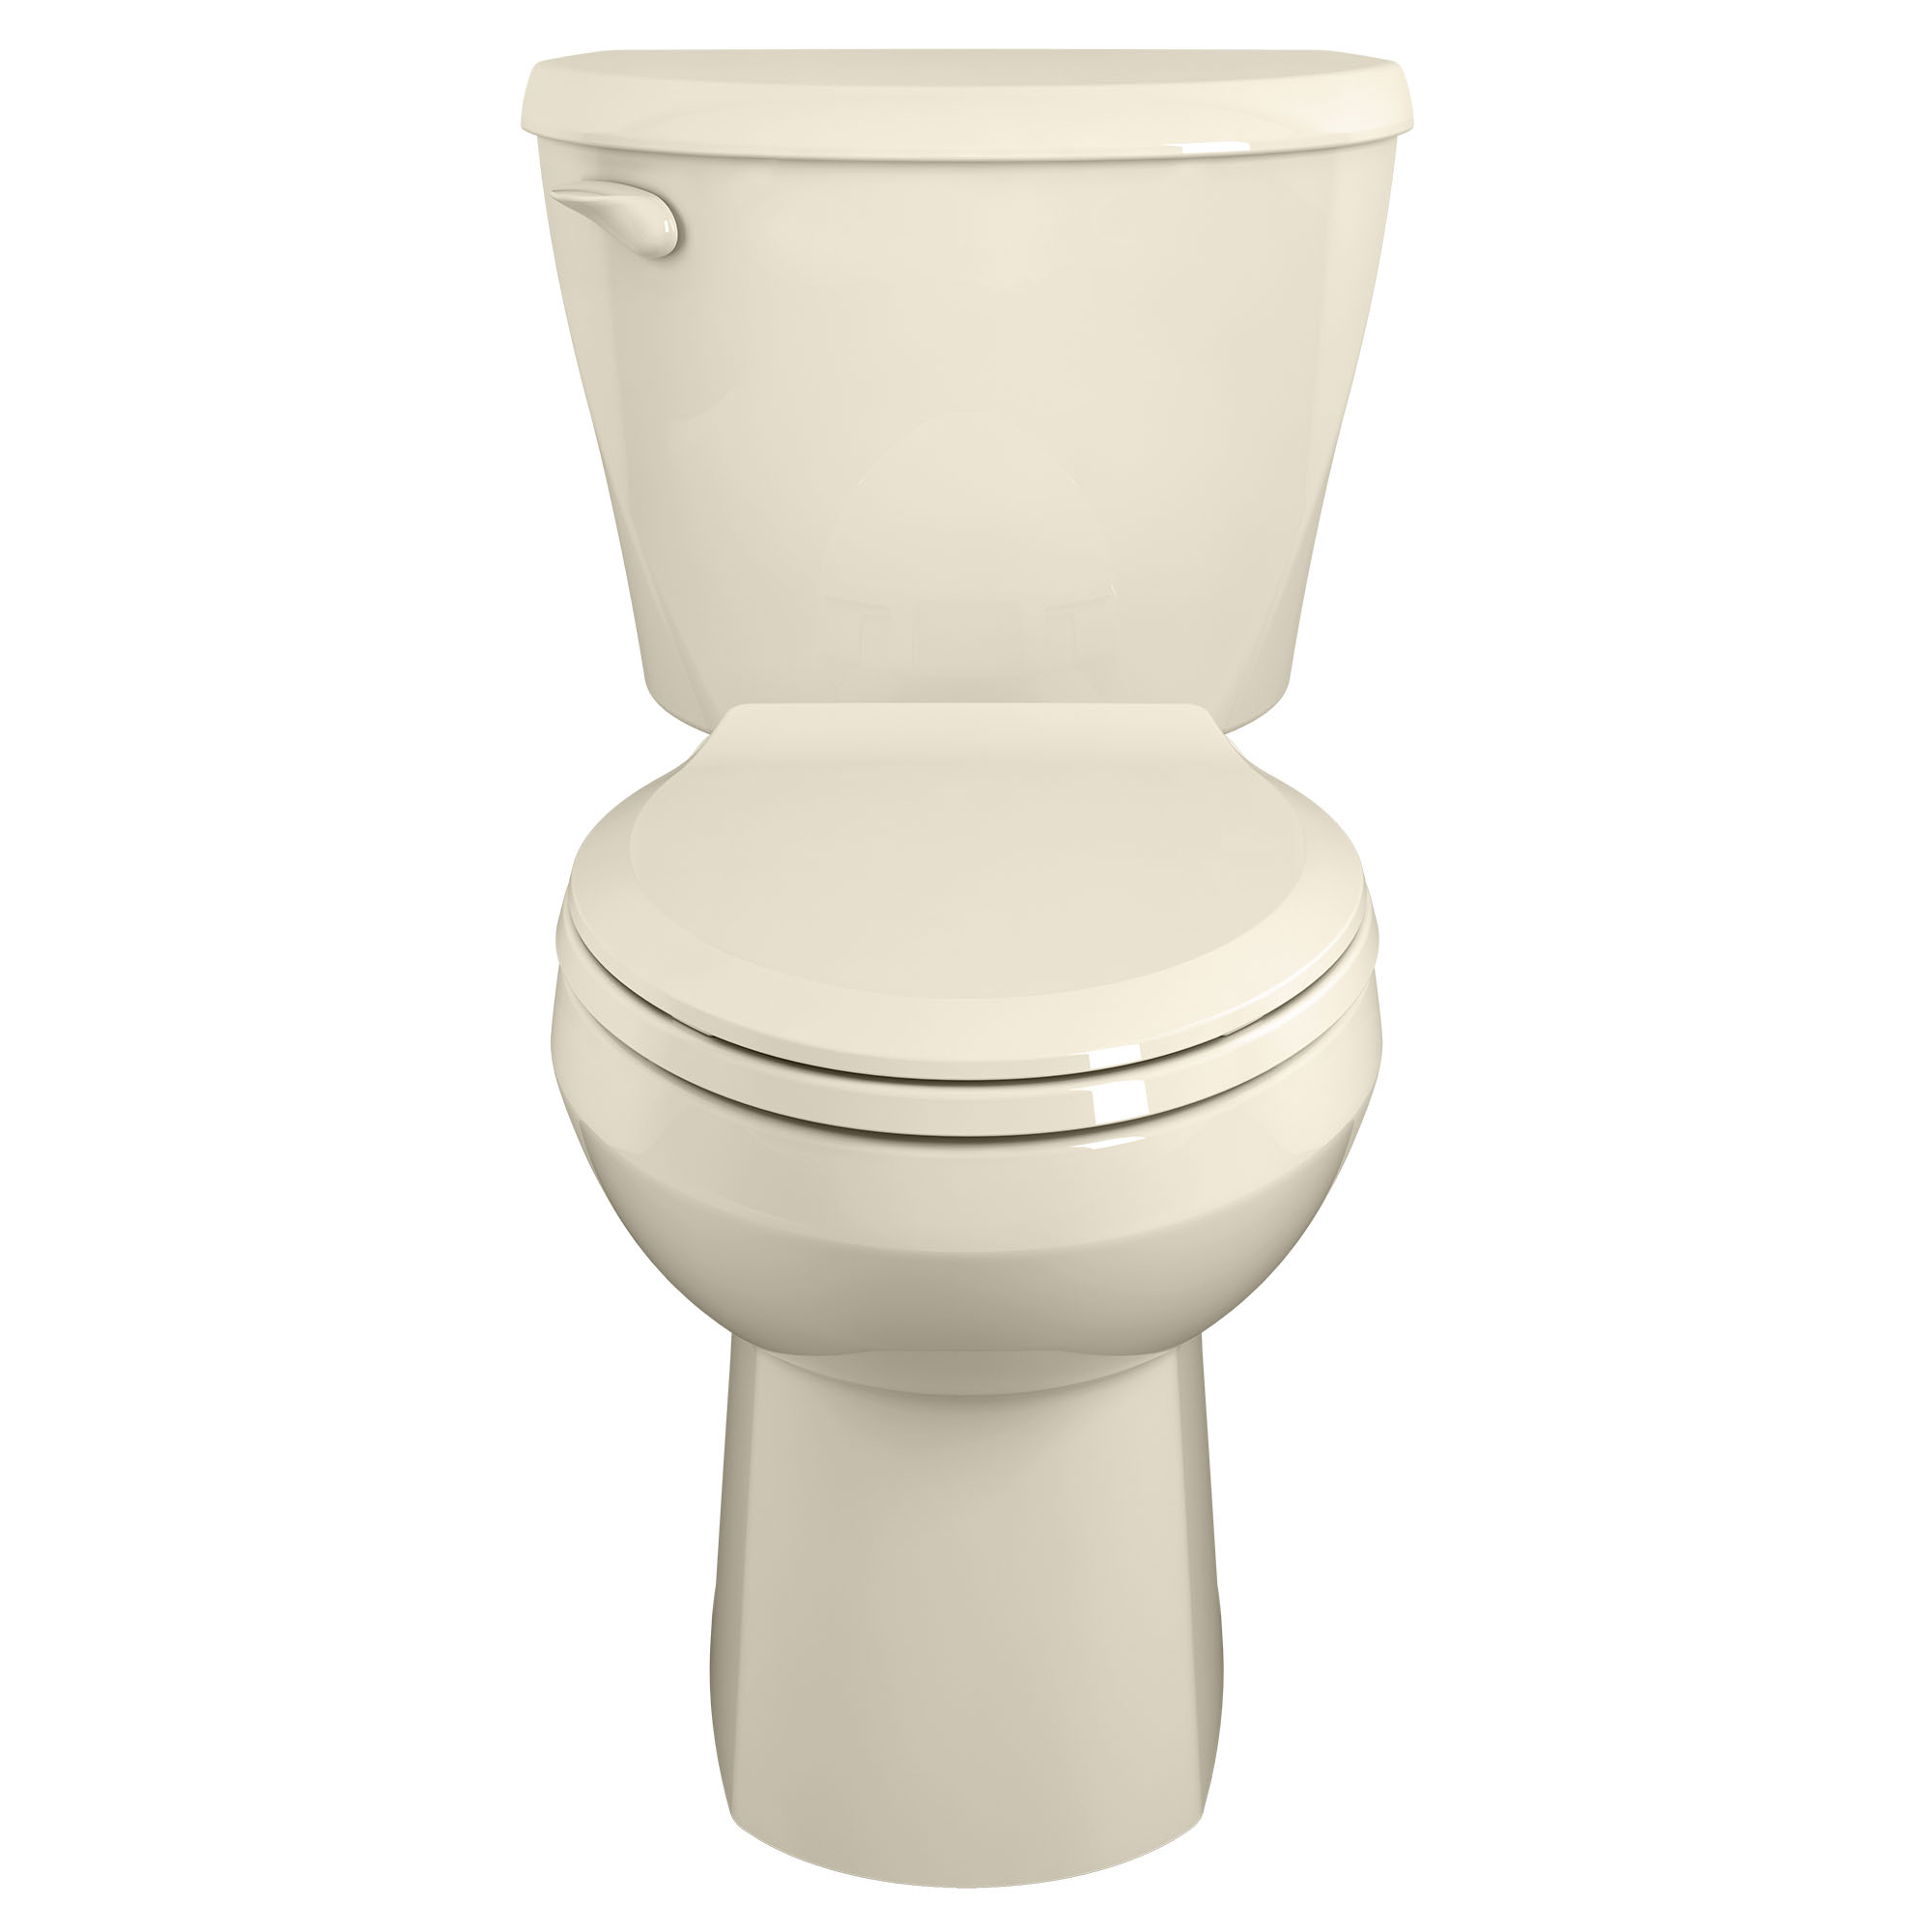 Colony™ Two-Piece 1.6 gpf/6.0 Lpf Standard Height Elongated Toilet Less Seat